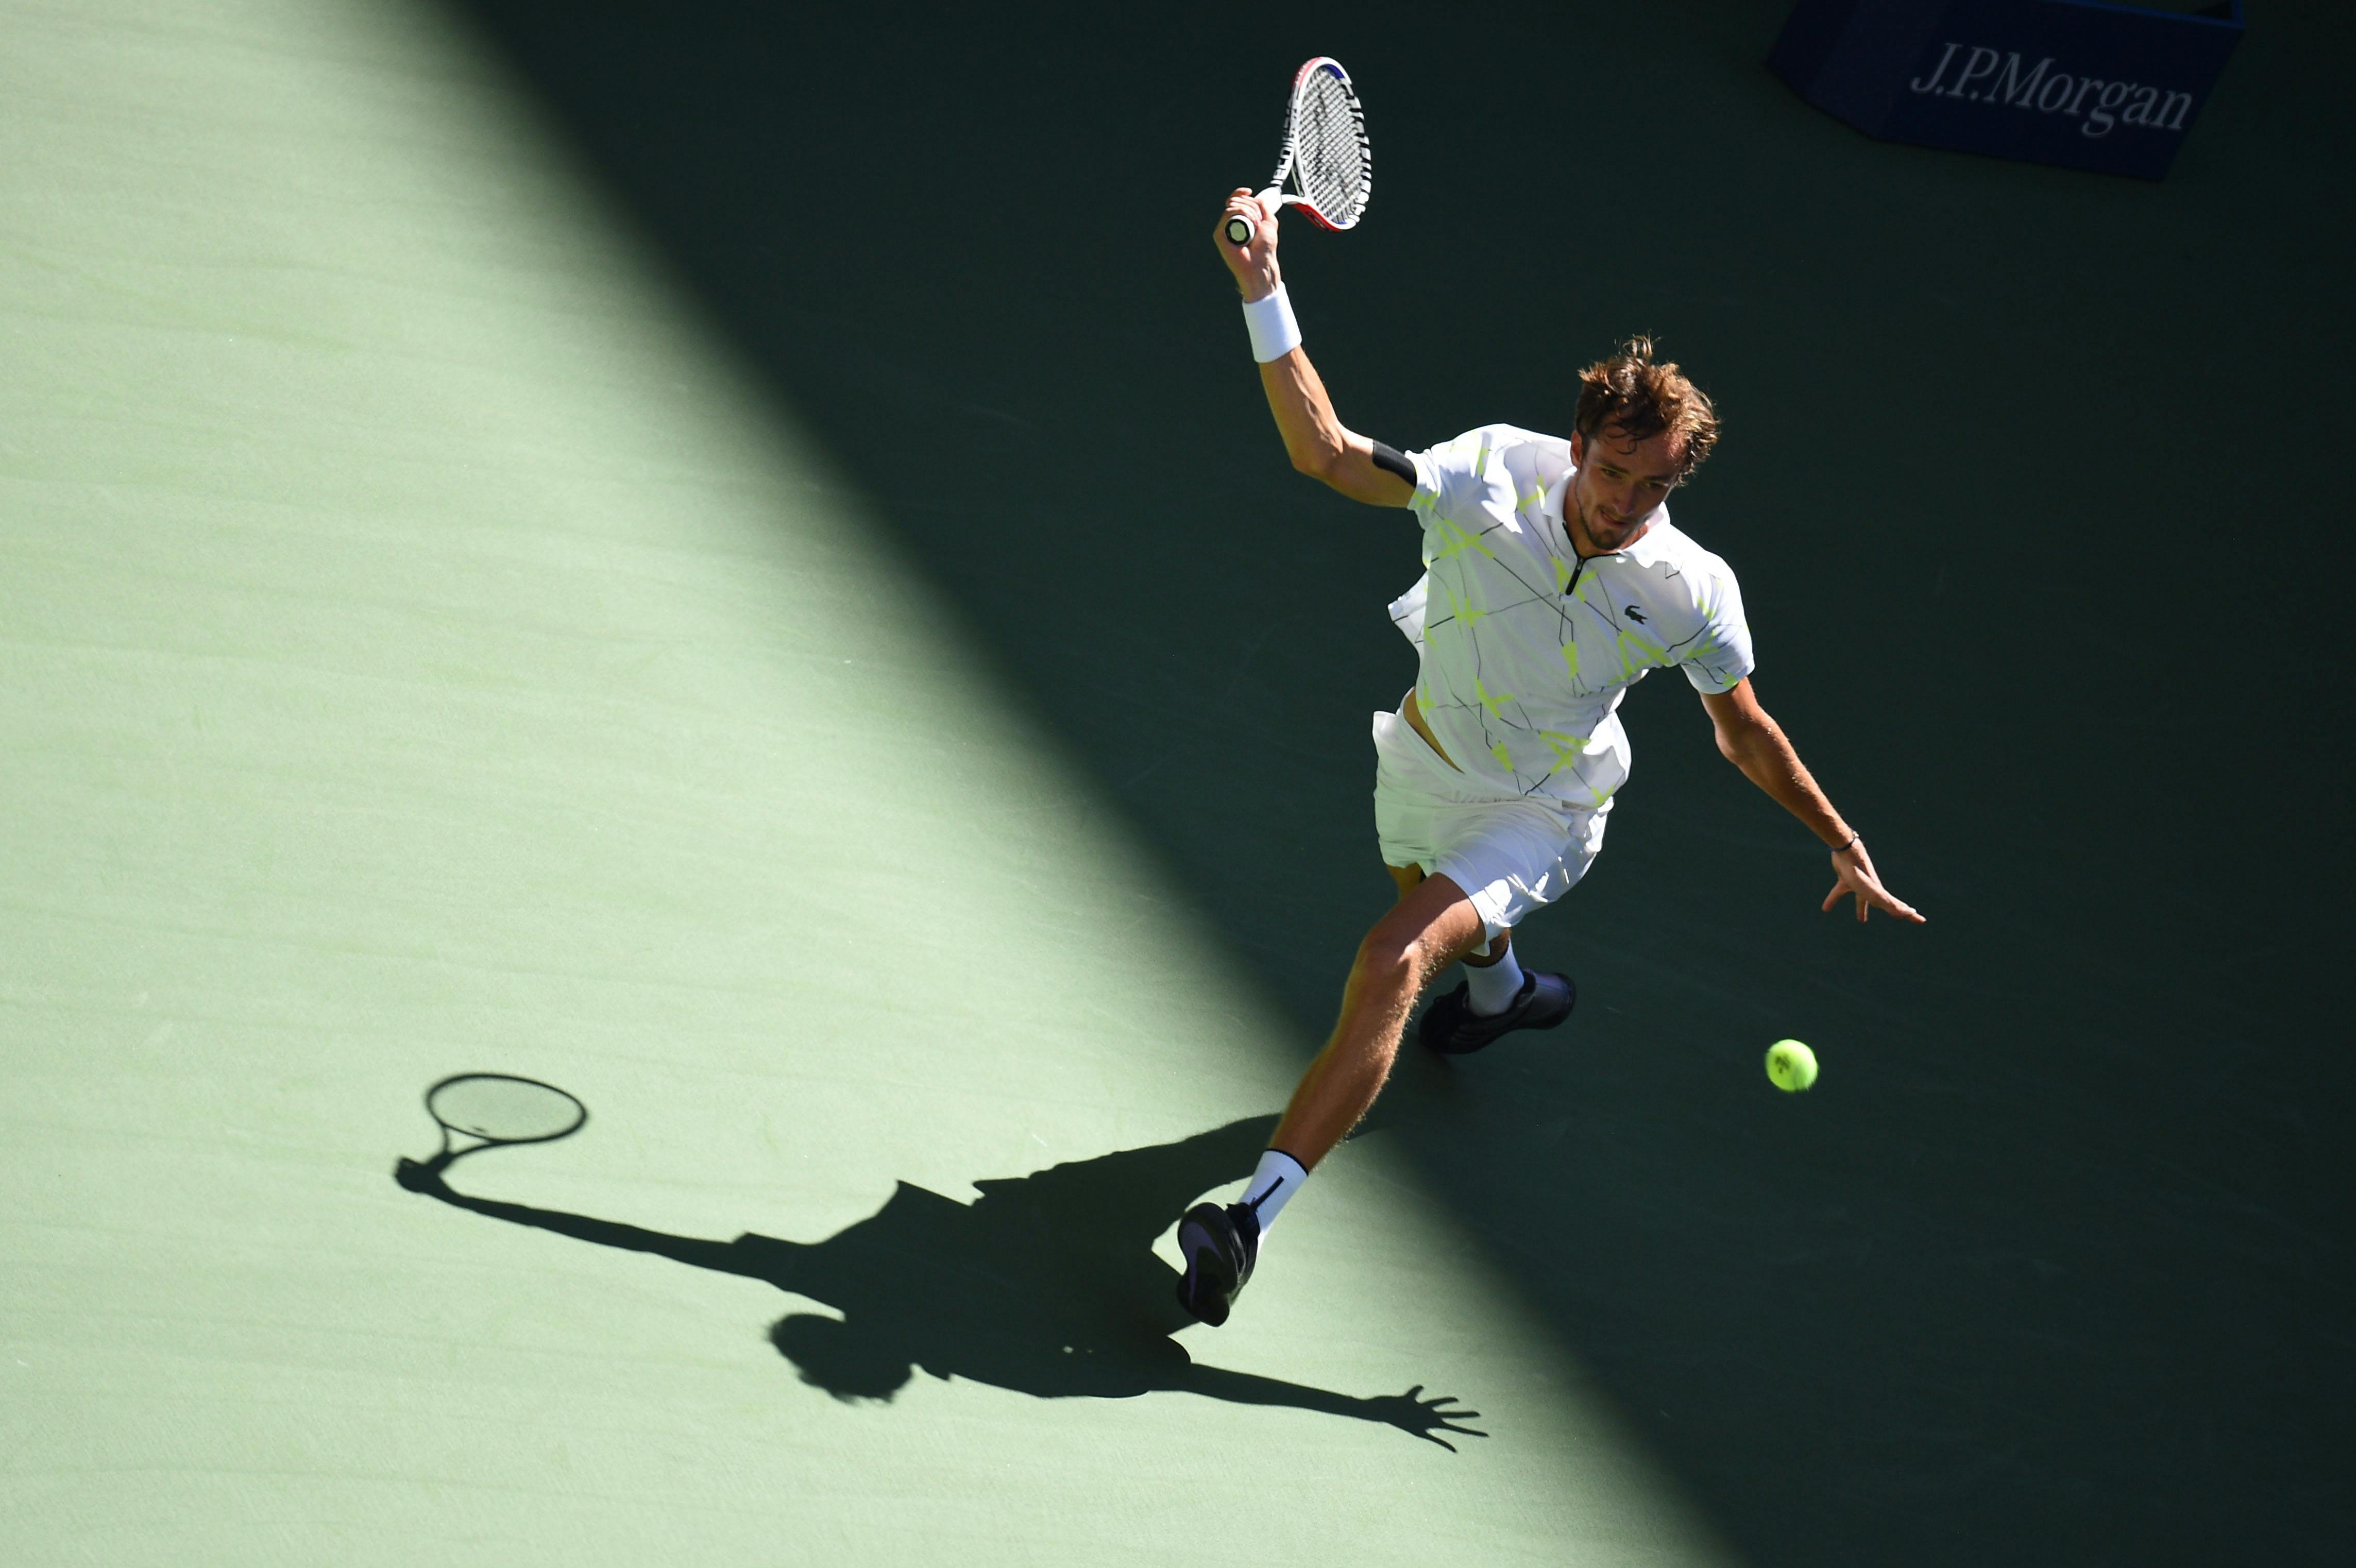 Daniil Medvedev in the light ans shadow at the 2019 US Open